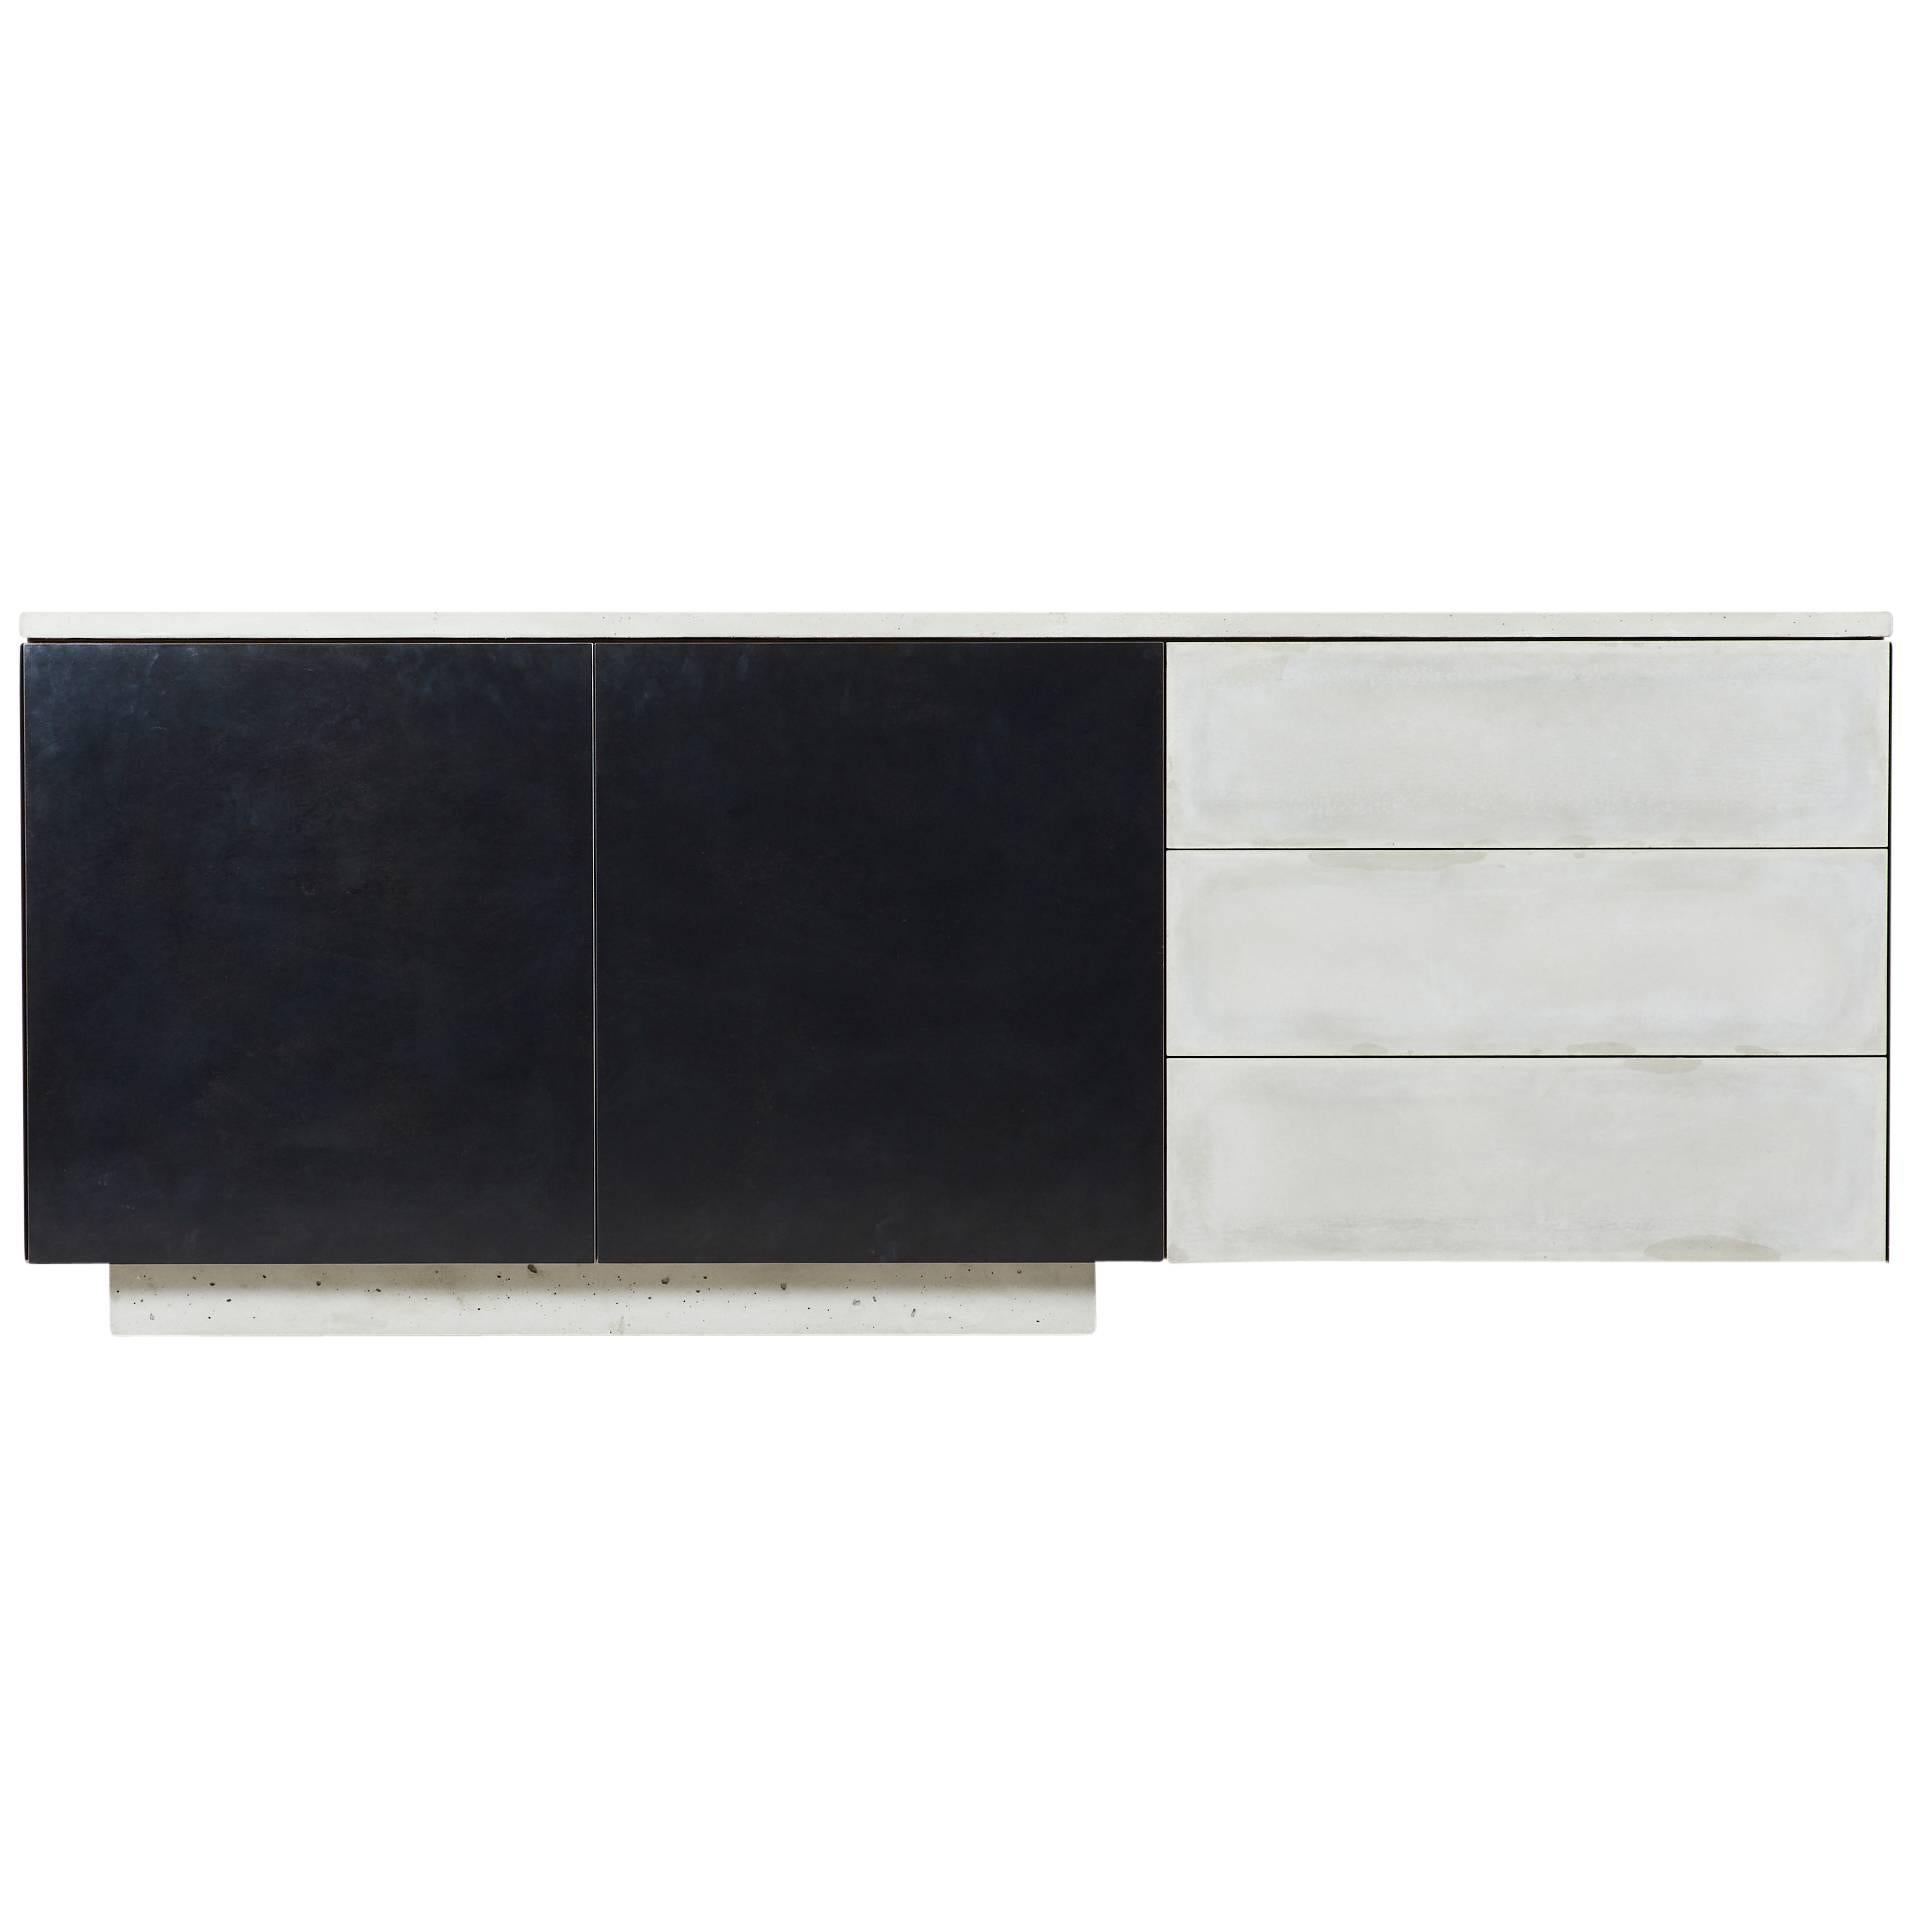 Solid Walnut, Blackened Steel and Cast Concrete "C-210" Cantilevered Credenza